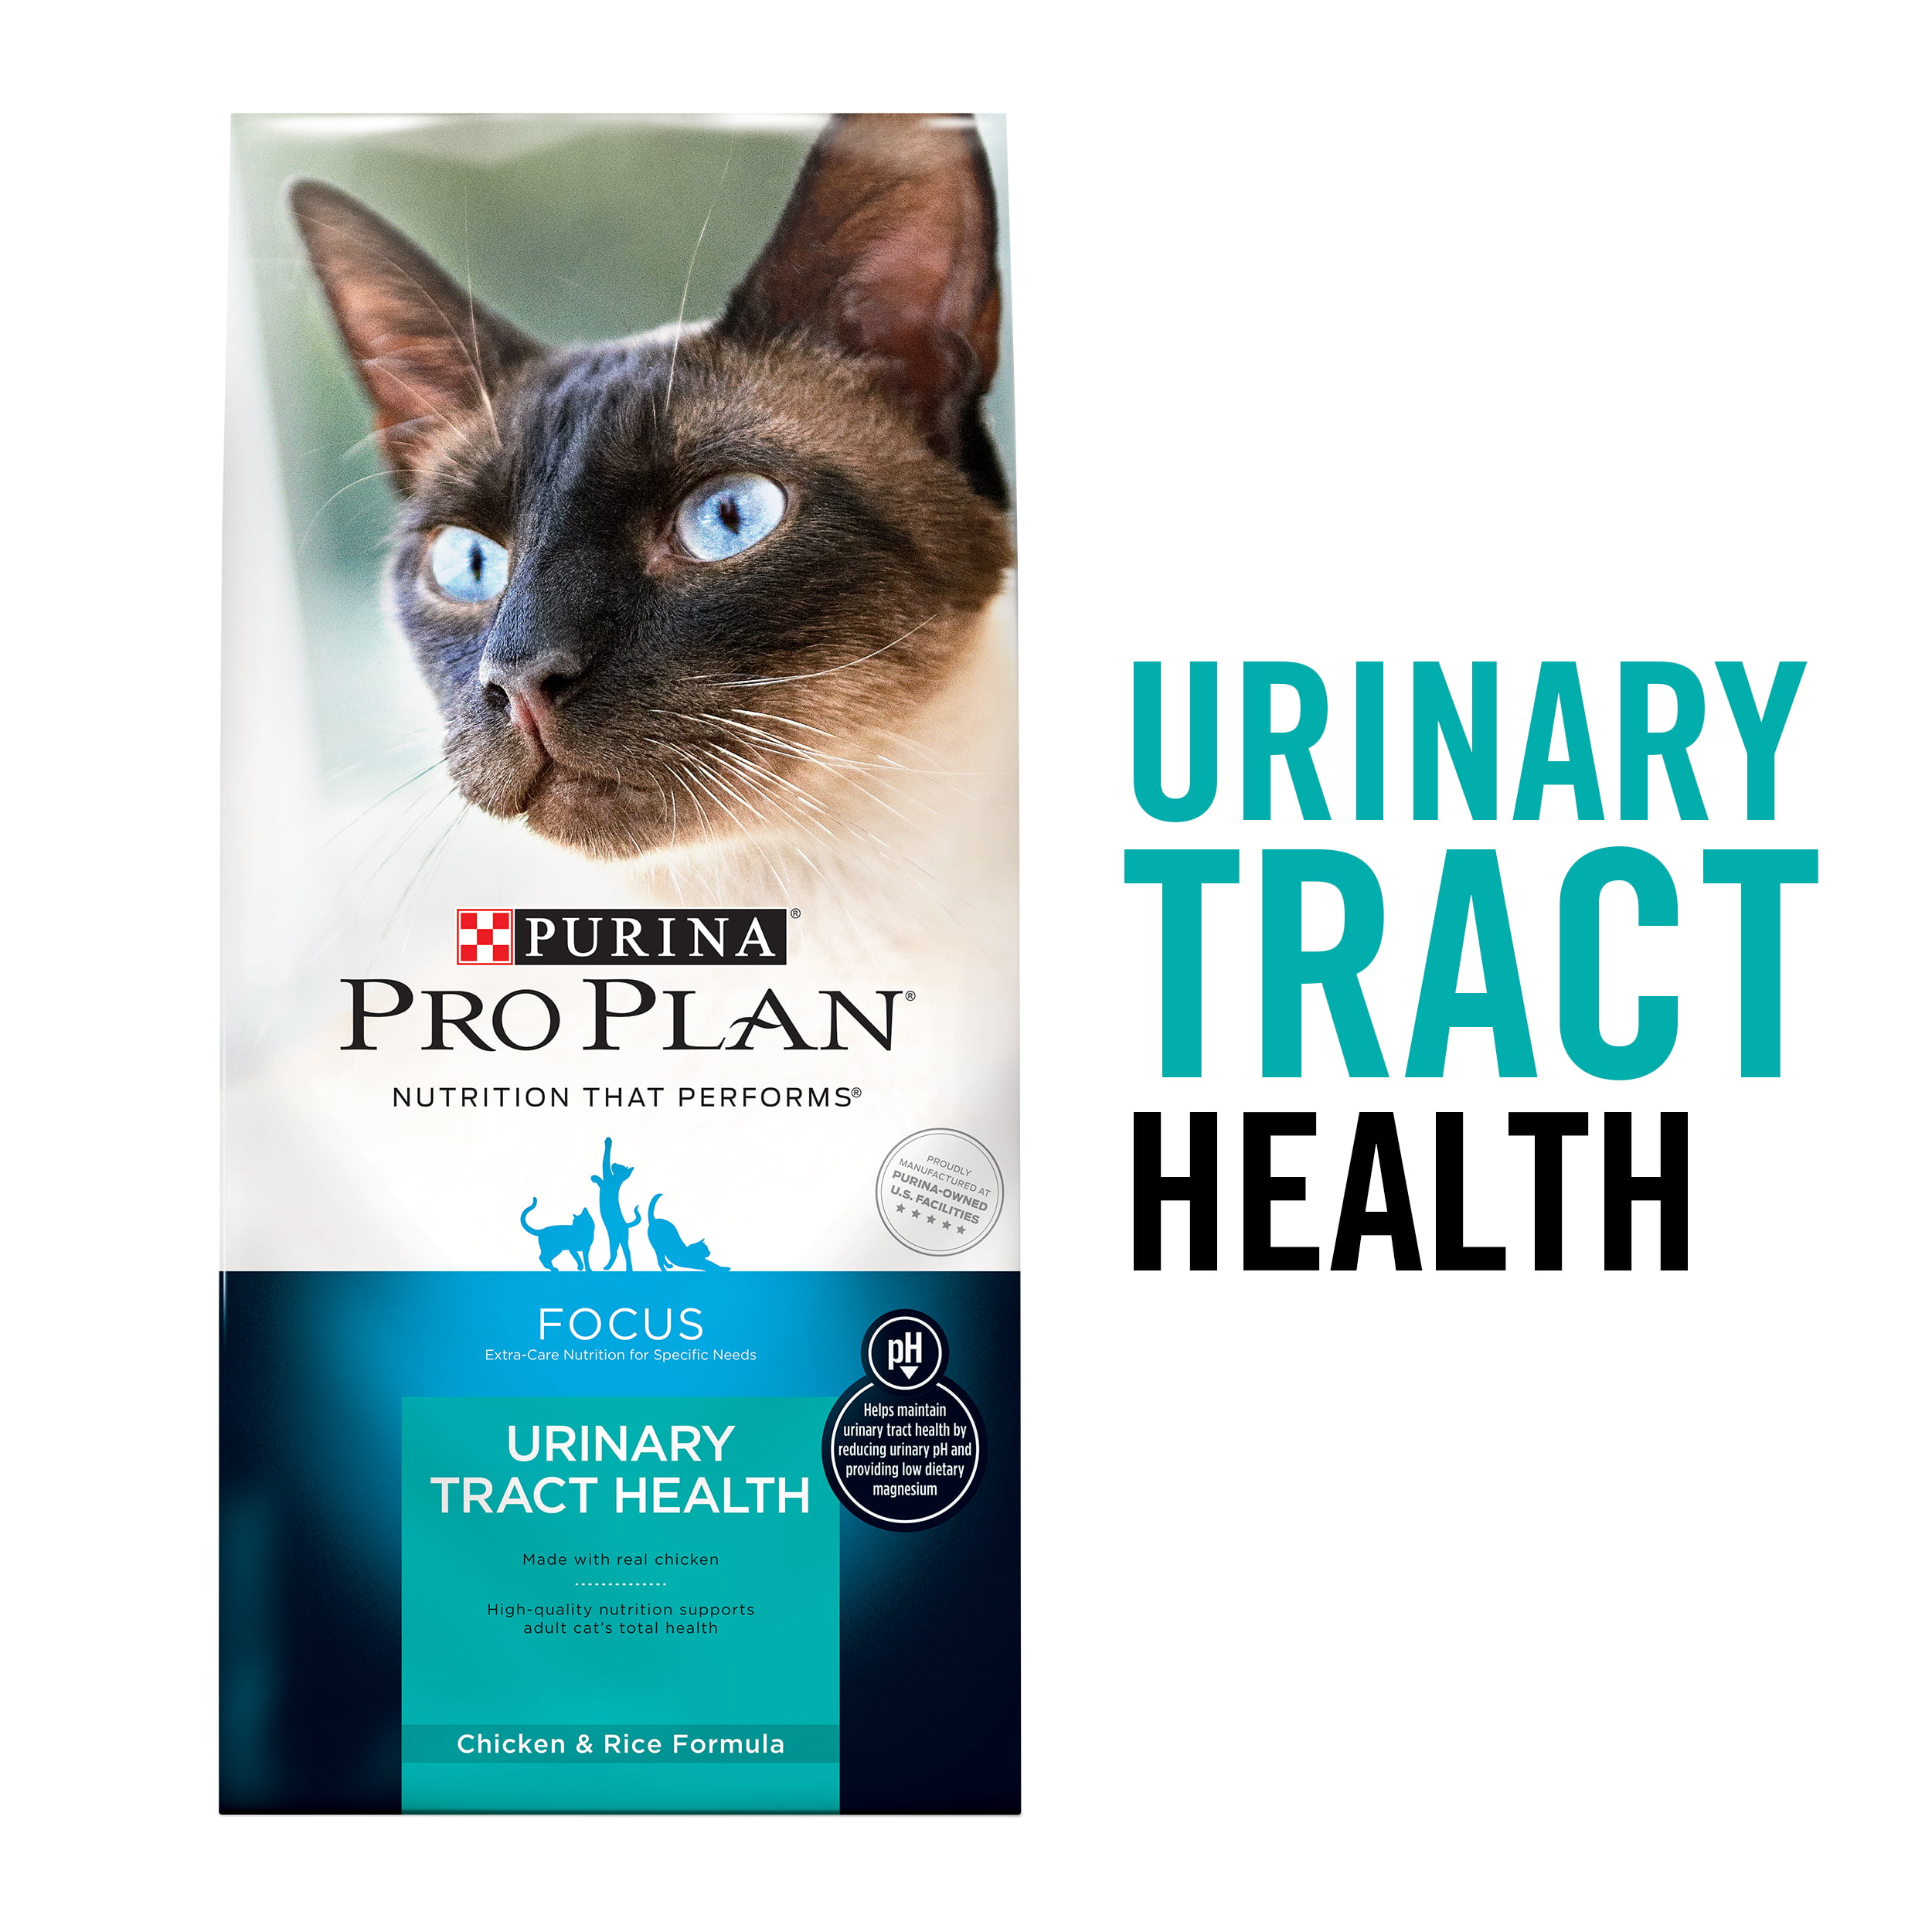 Must Have Purina Pro Plan Urinary Tract Health Dry Cat Food Focus Urinary Tract Health Chicken Rice Formula 7 Lb Bag From Purina Pro Plan Accuweather Shop